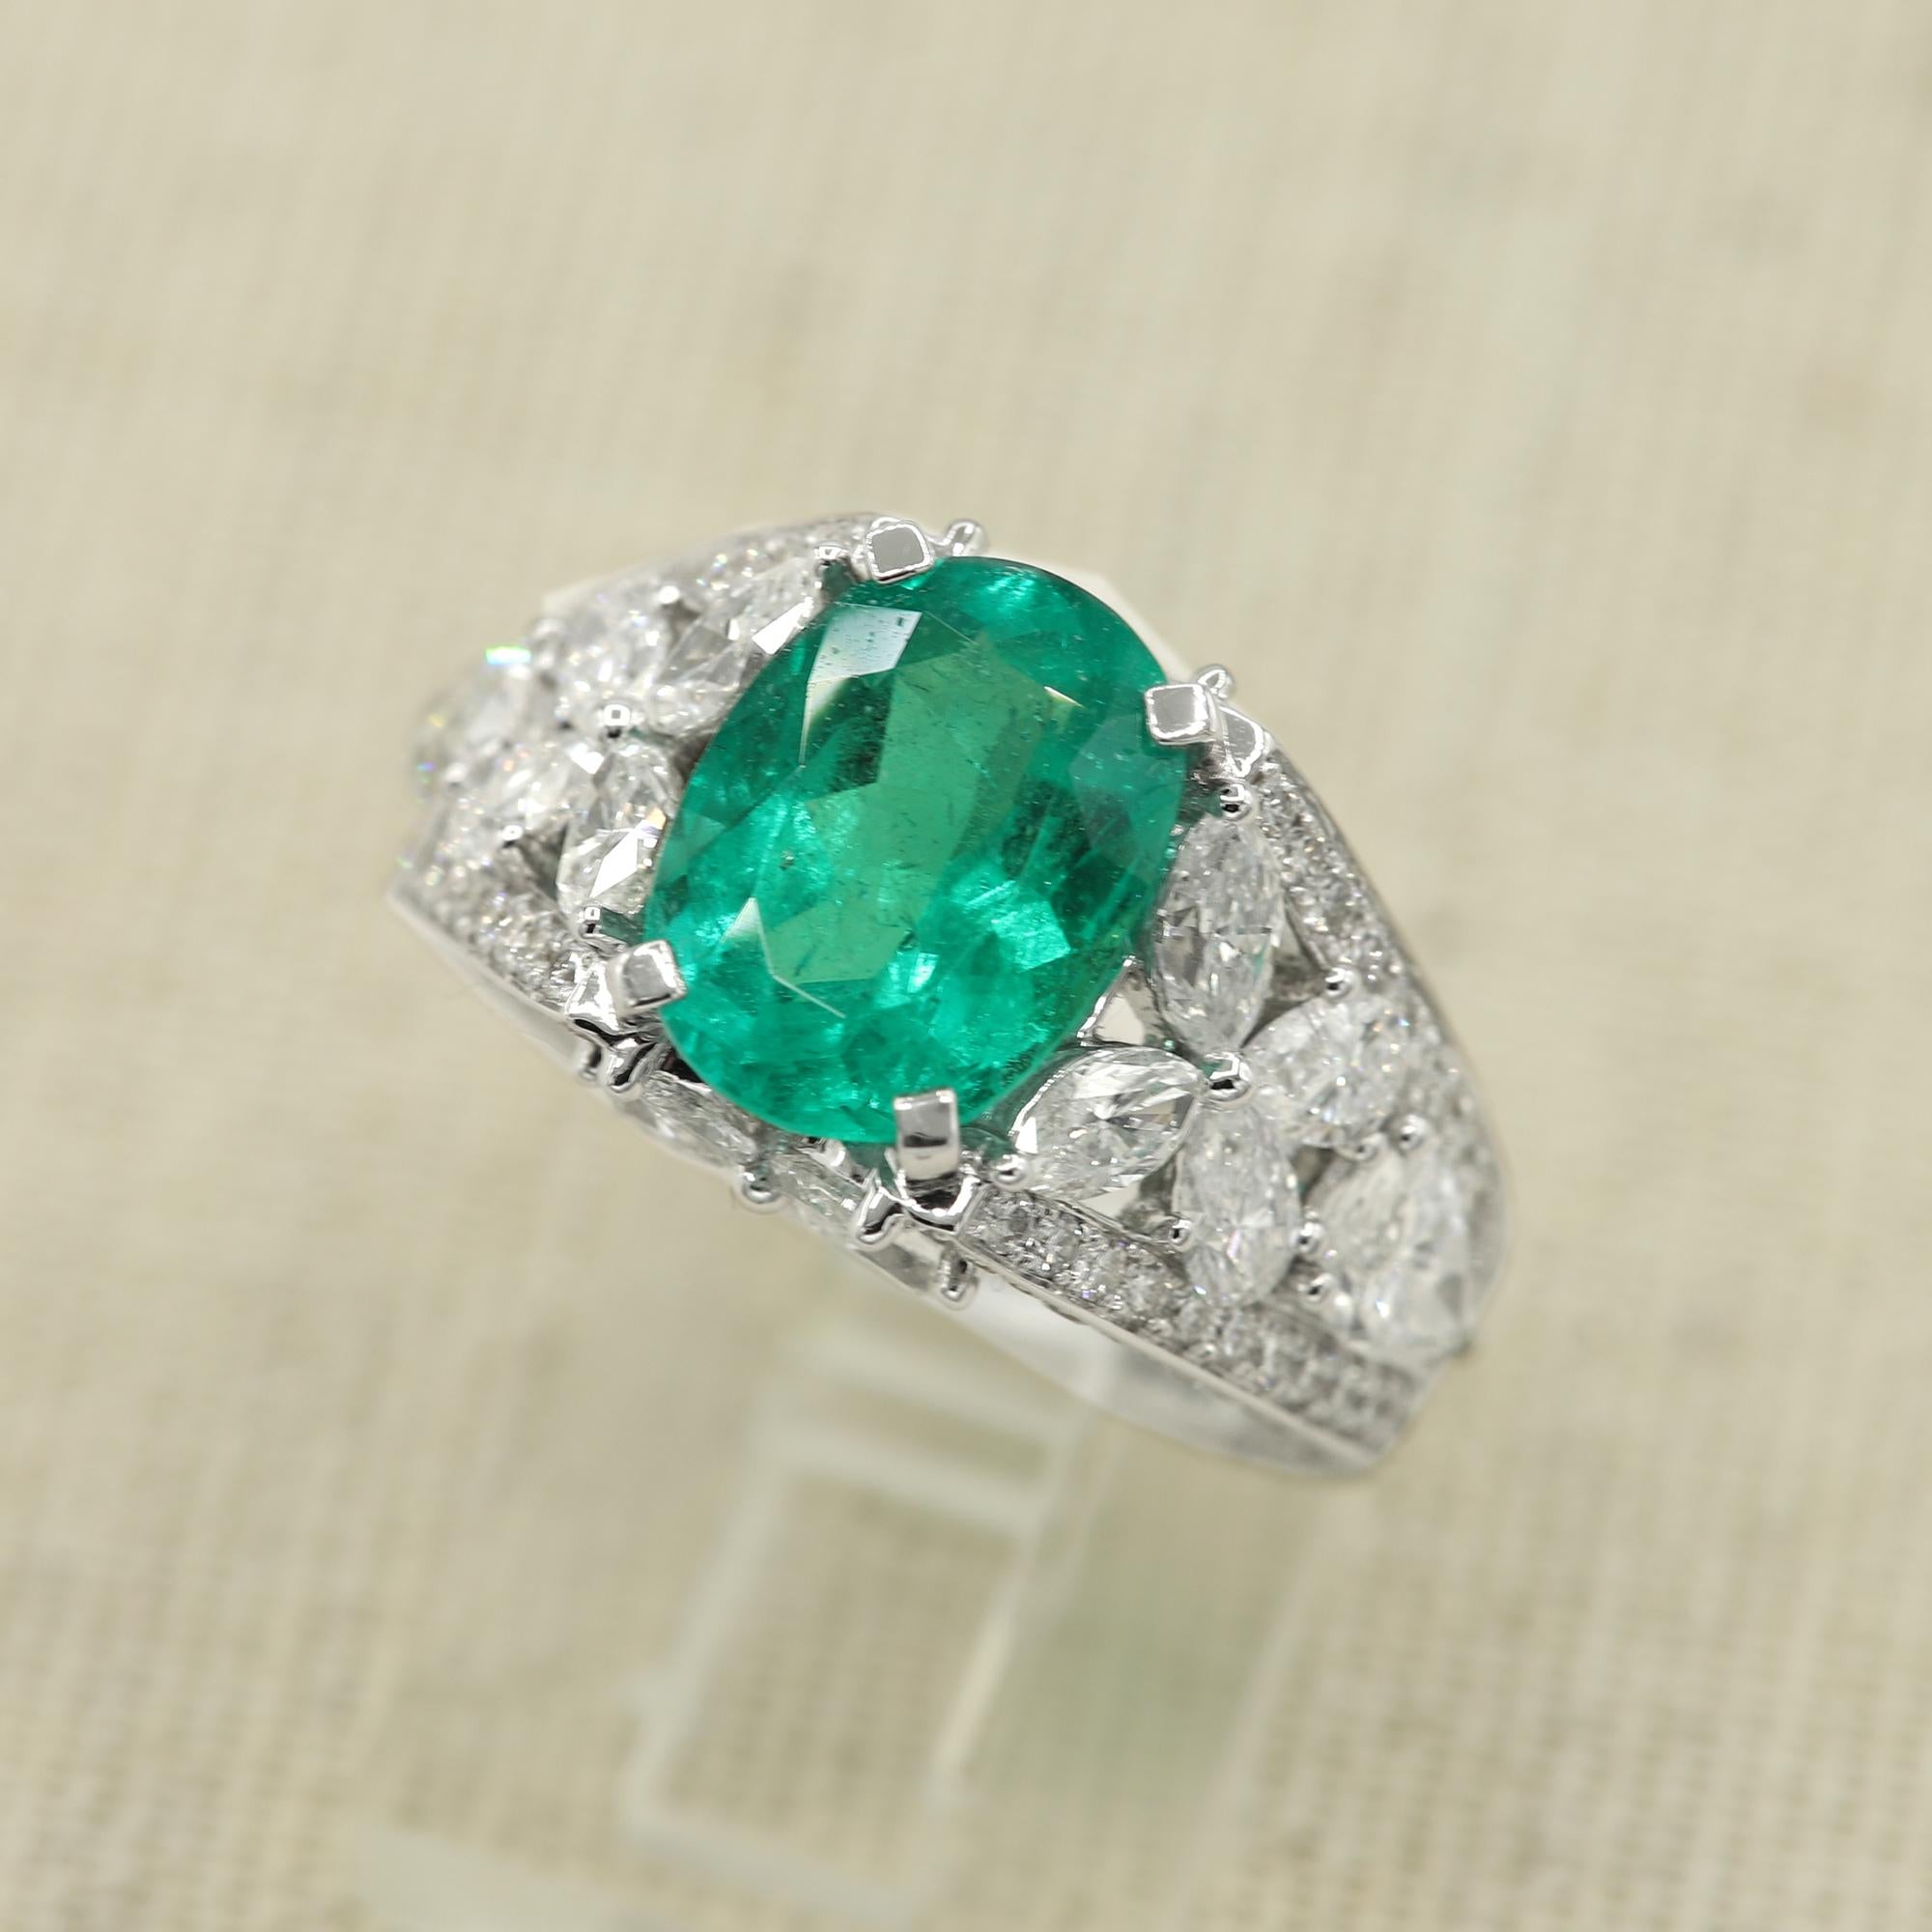 Fancy Emerald with Mix shaped Diamonds, Pear, Round & Marquise. 
Emerald is 3.44 carat / 12 x 8.5 mm. medium hue color total of all Diamonds 4.34 carat GH-VS-SI.
18k White Gold 11.0 grams.
Finger size 7

 